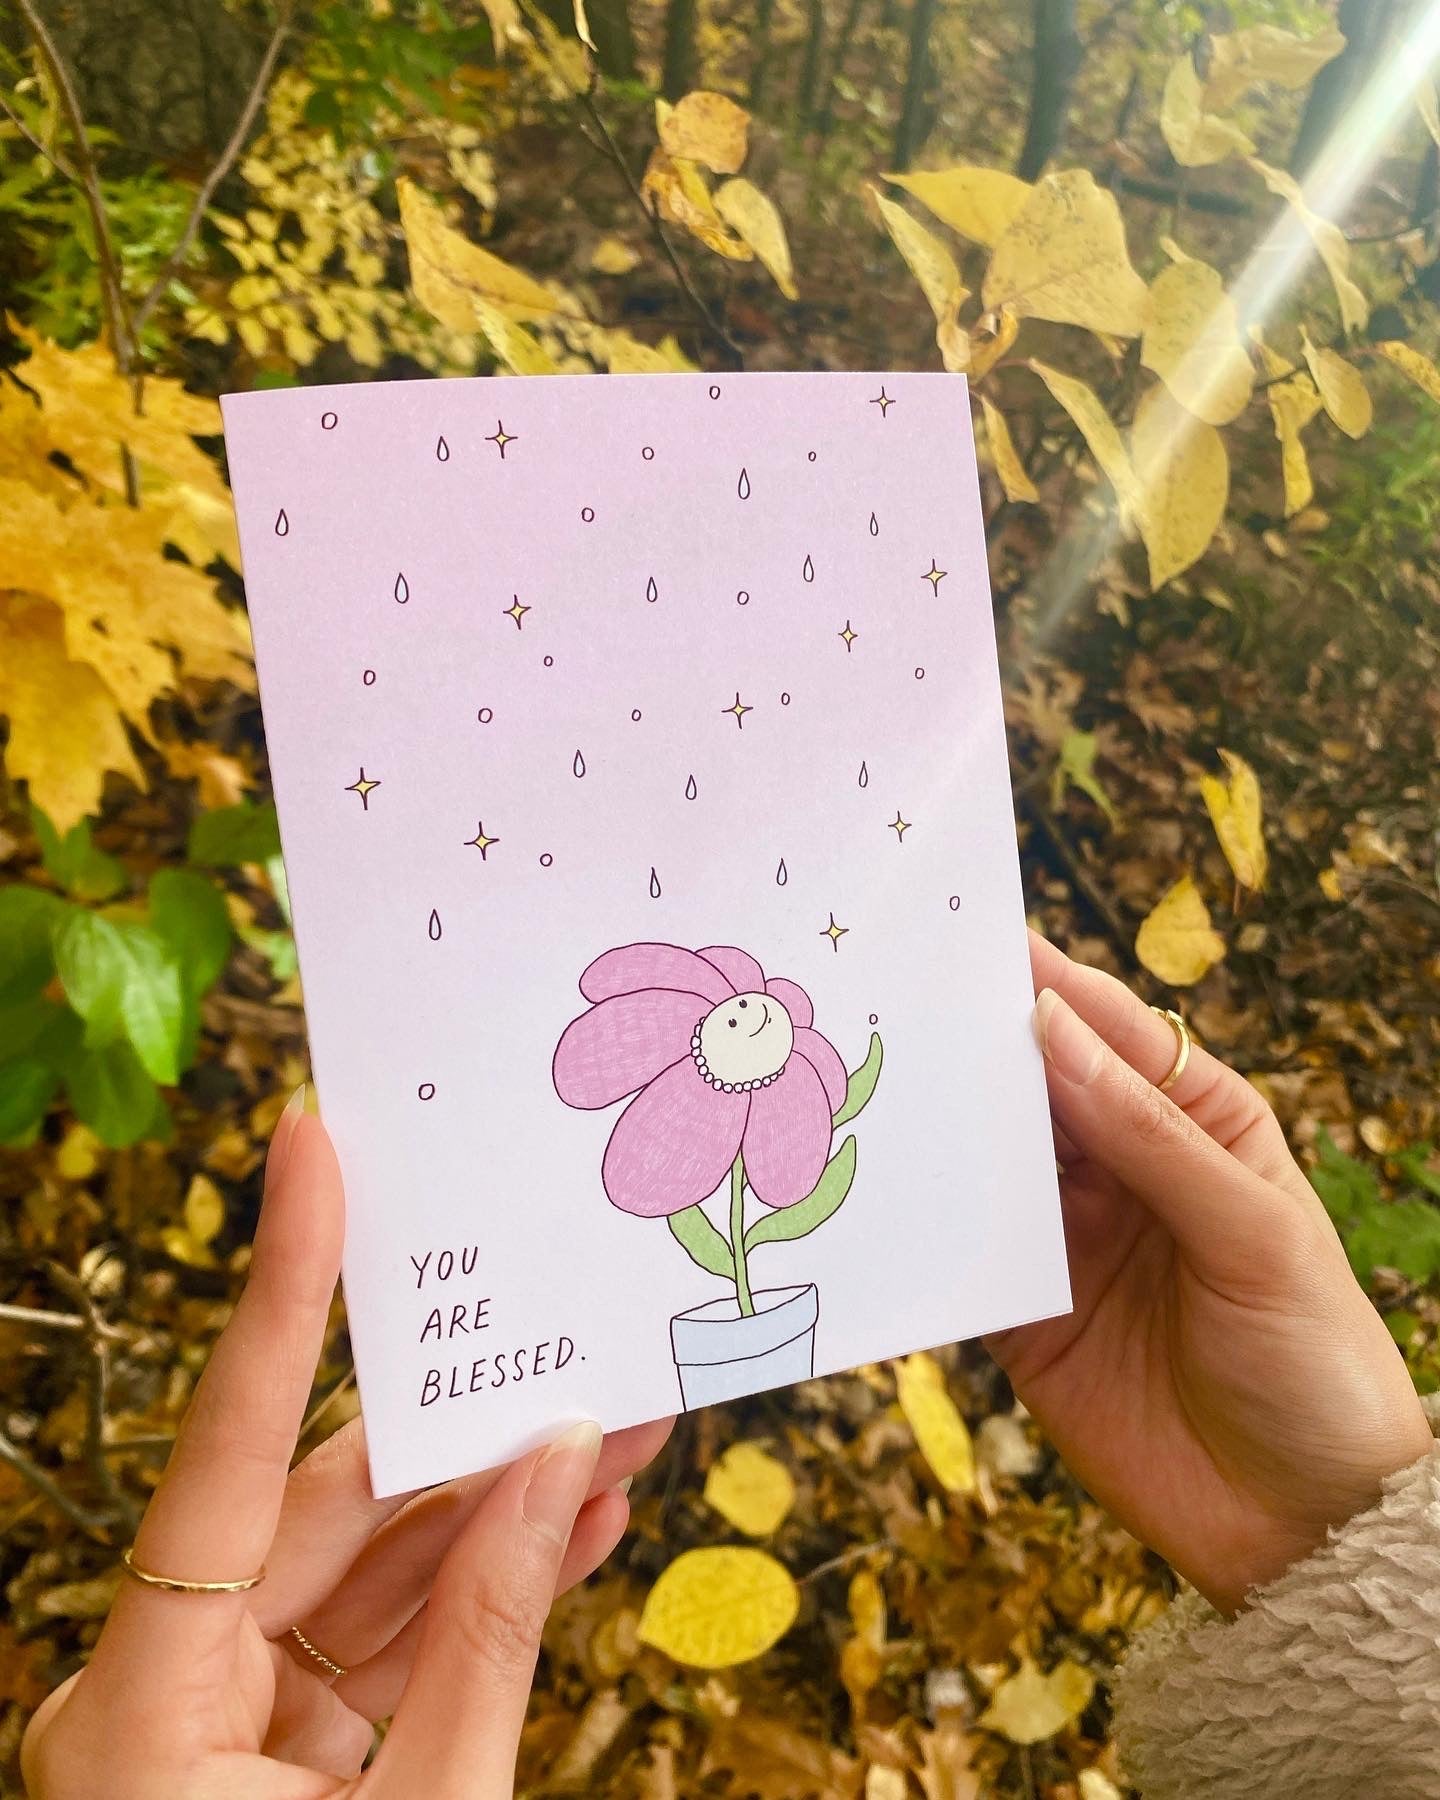 Motivational just because card that says “You Are Blessed” with the illustration of a happy pink flower being blessed by sparkly pink sky